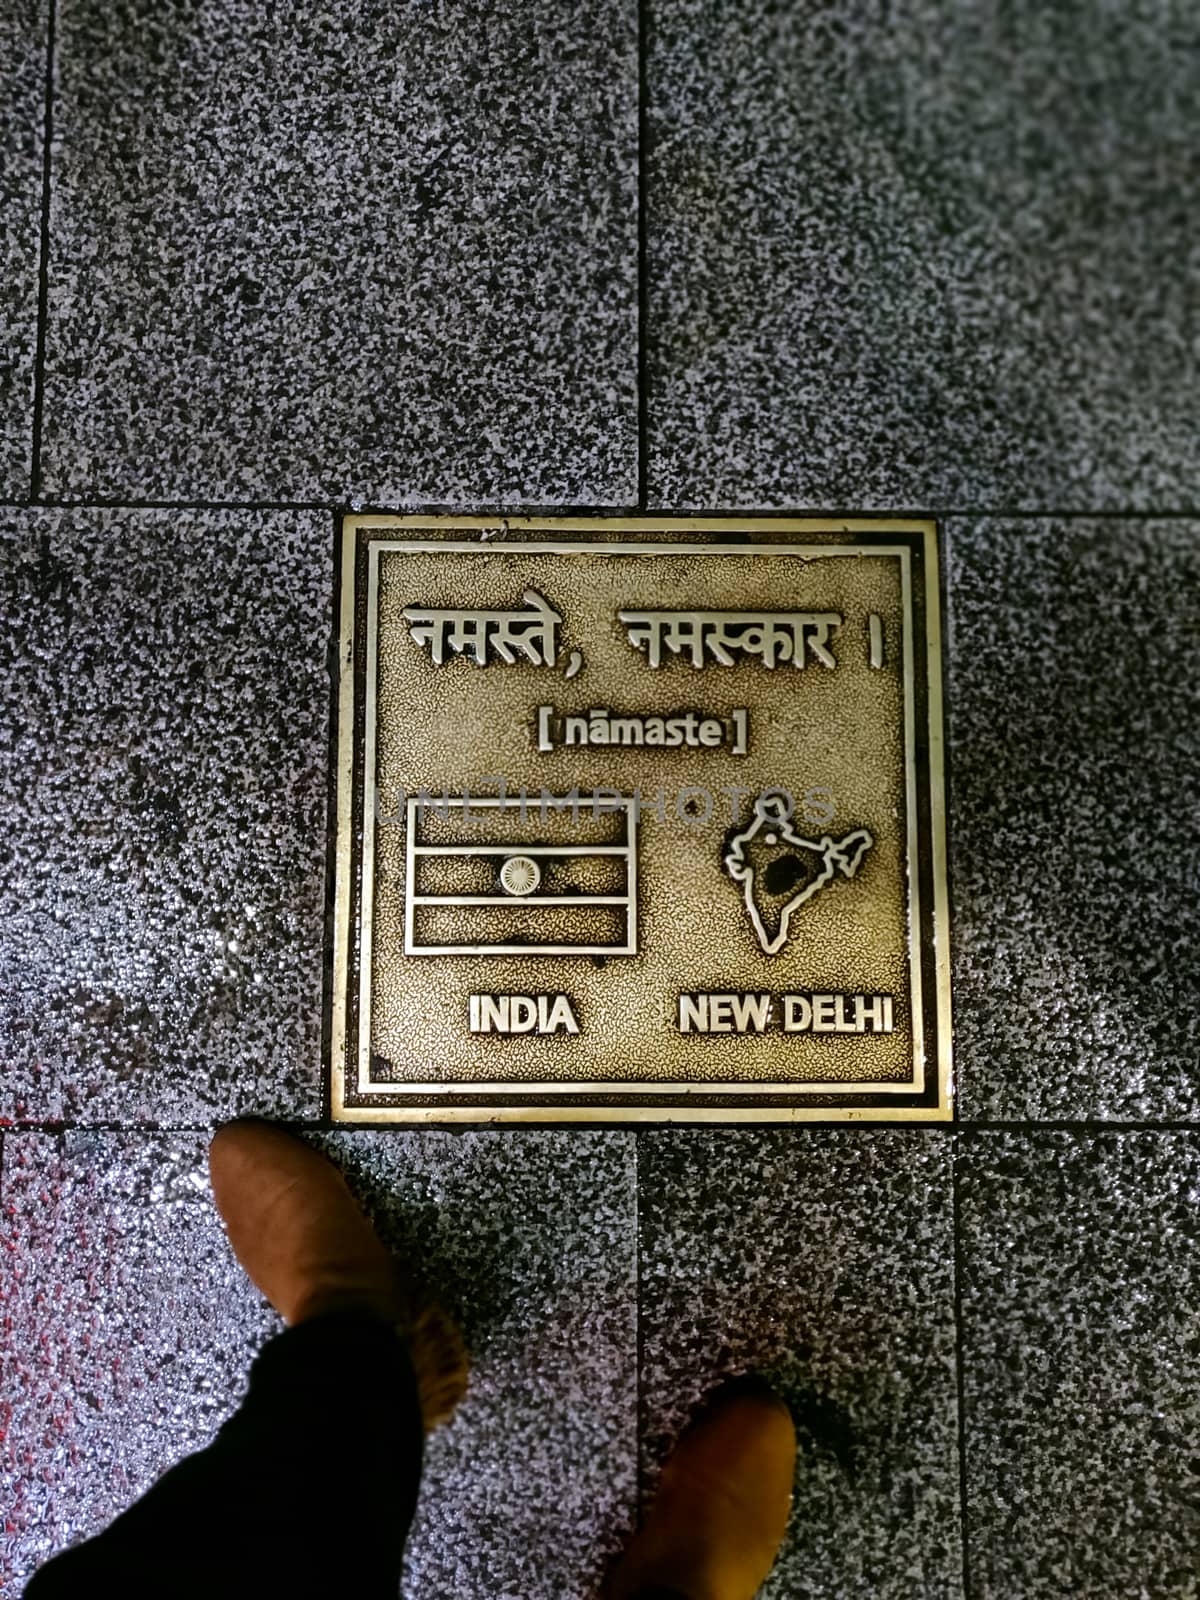 India, New Delhi plaque on the streets of Itaewon by mshivangi92